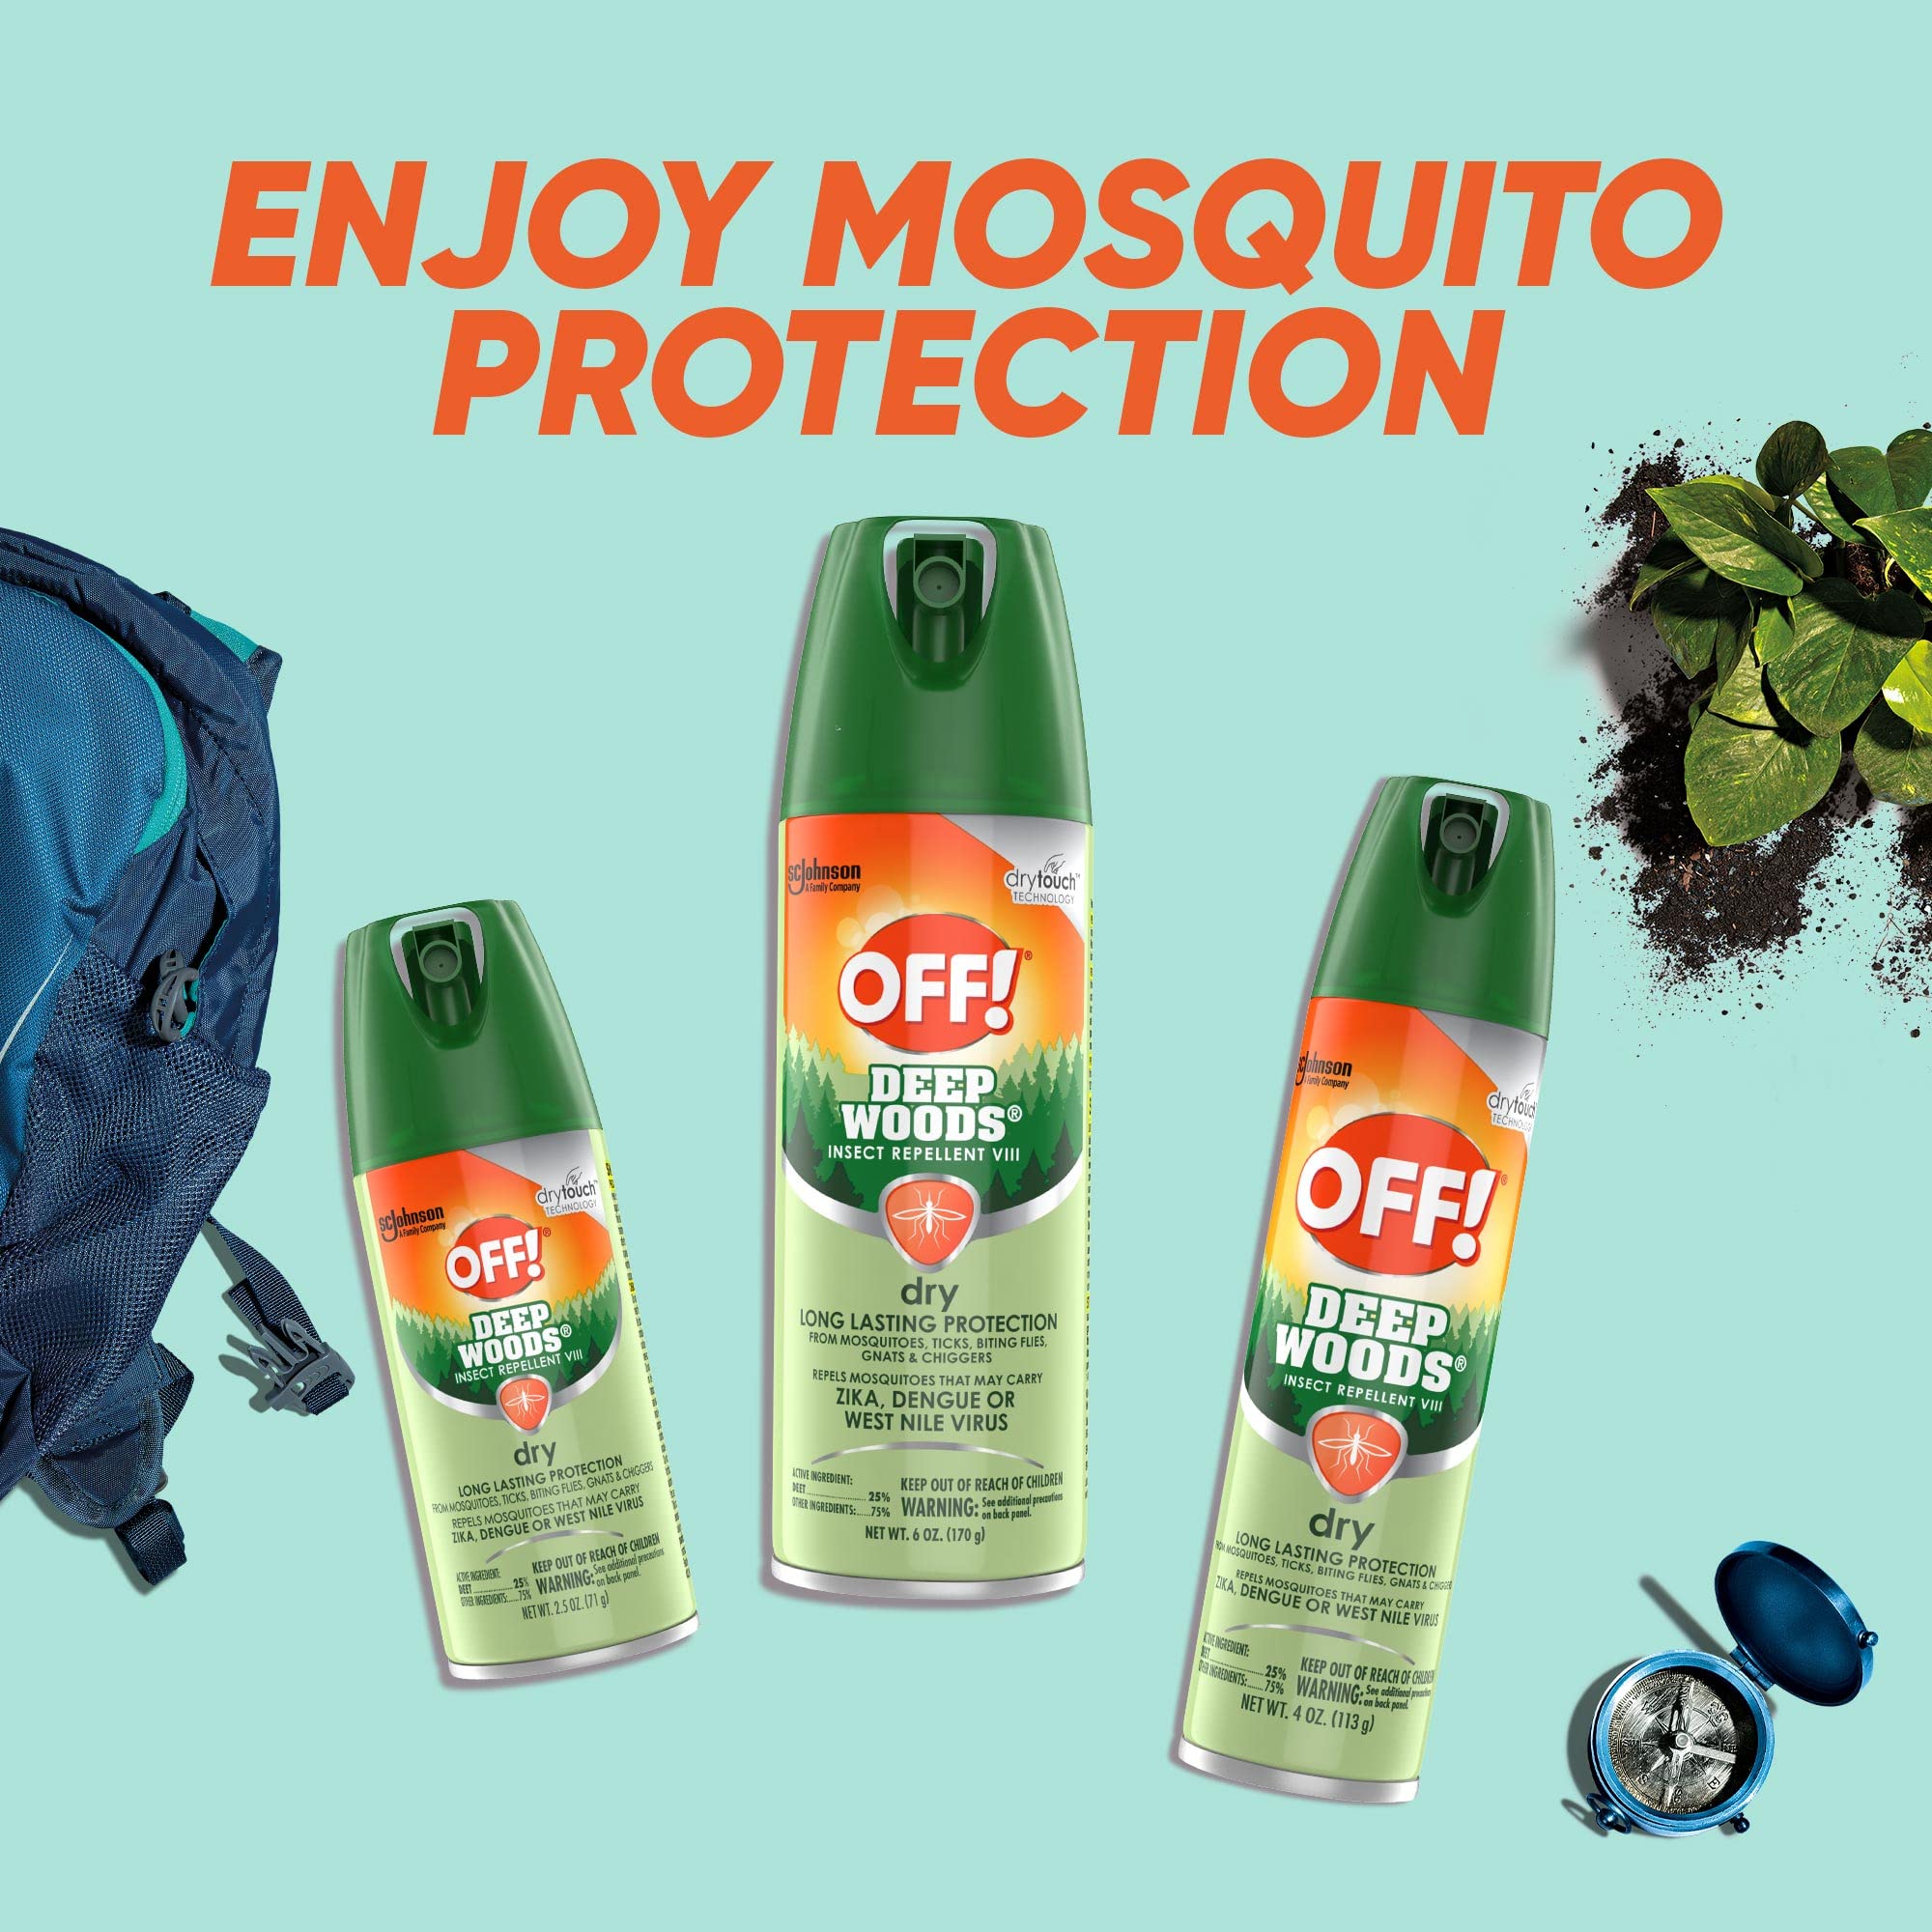 OFF! Deep Woods Dry Aerosol Insect Repellent - 25% DEET, 2.5 oz, Long Lasting, Non-Greasy